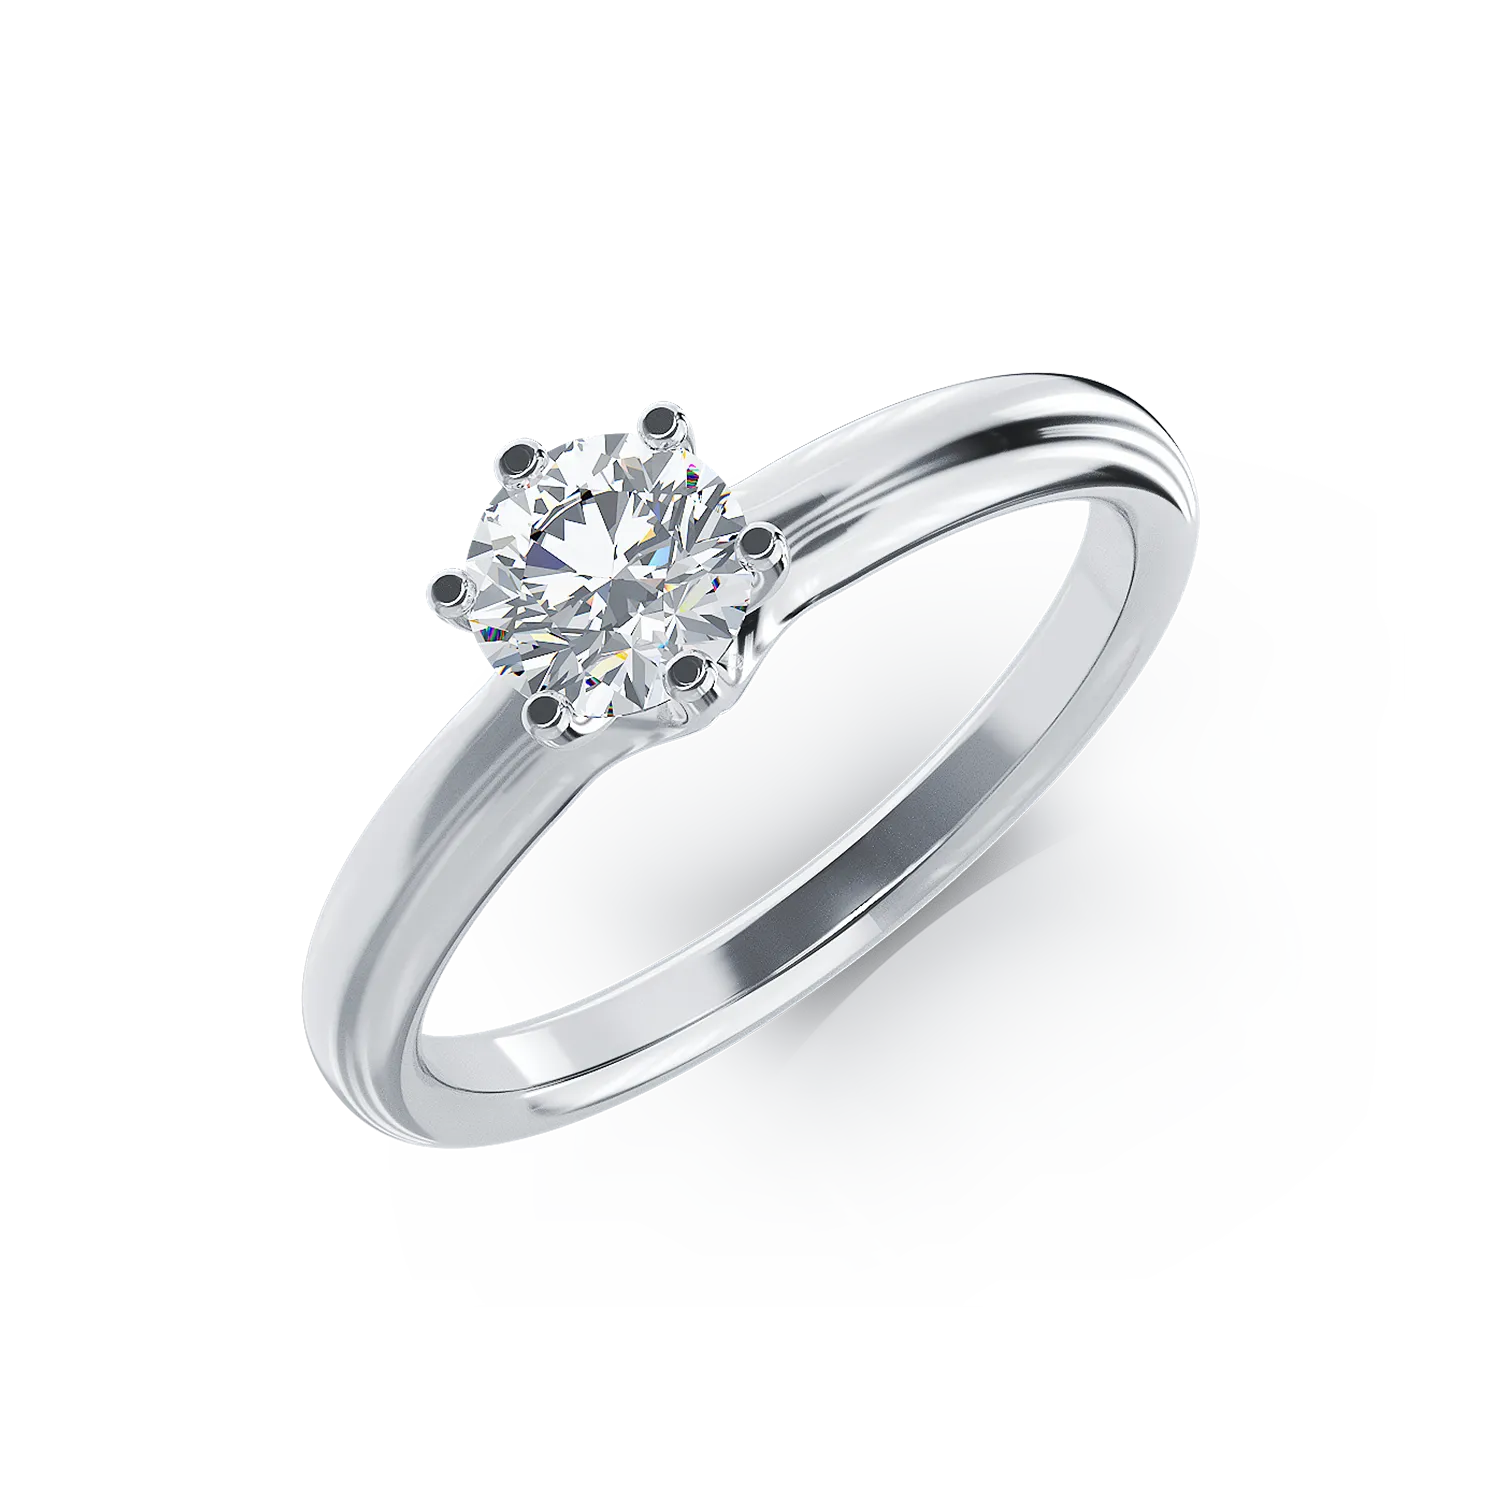 Platinum engagement ring with a 0.61ct solitaire diamond